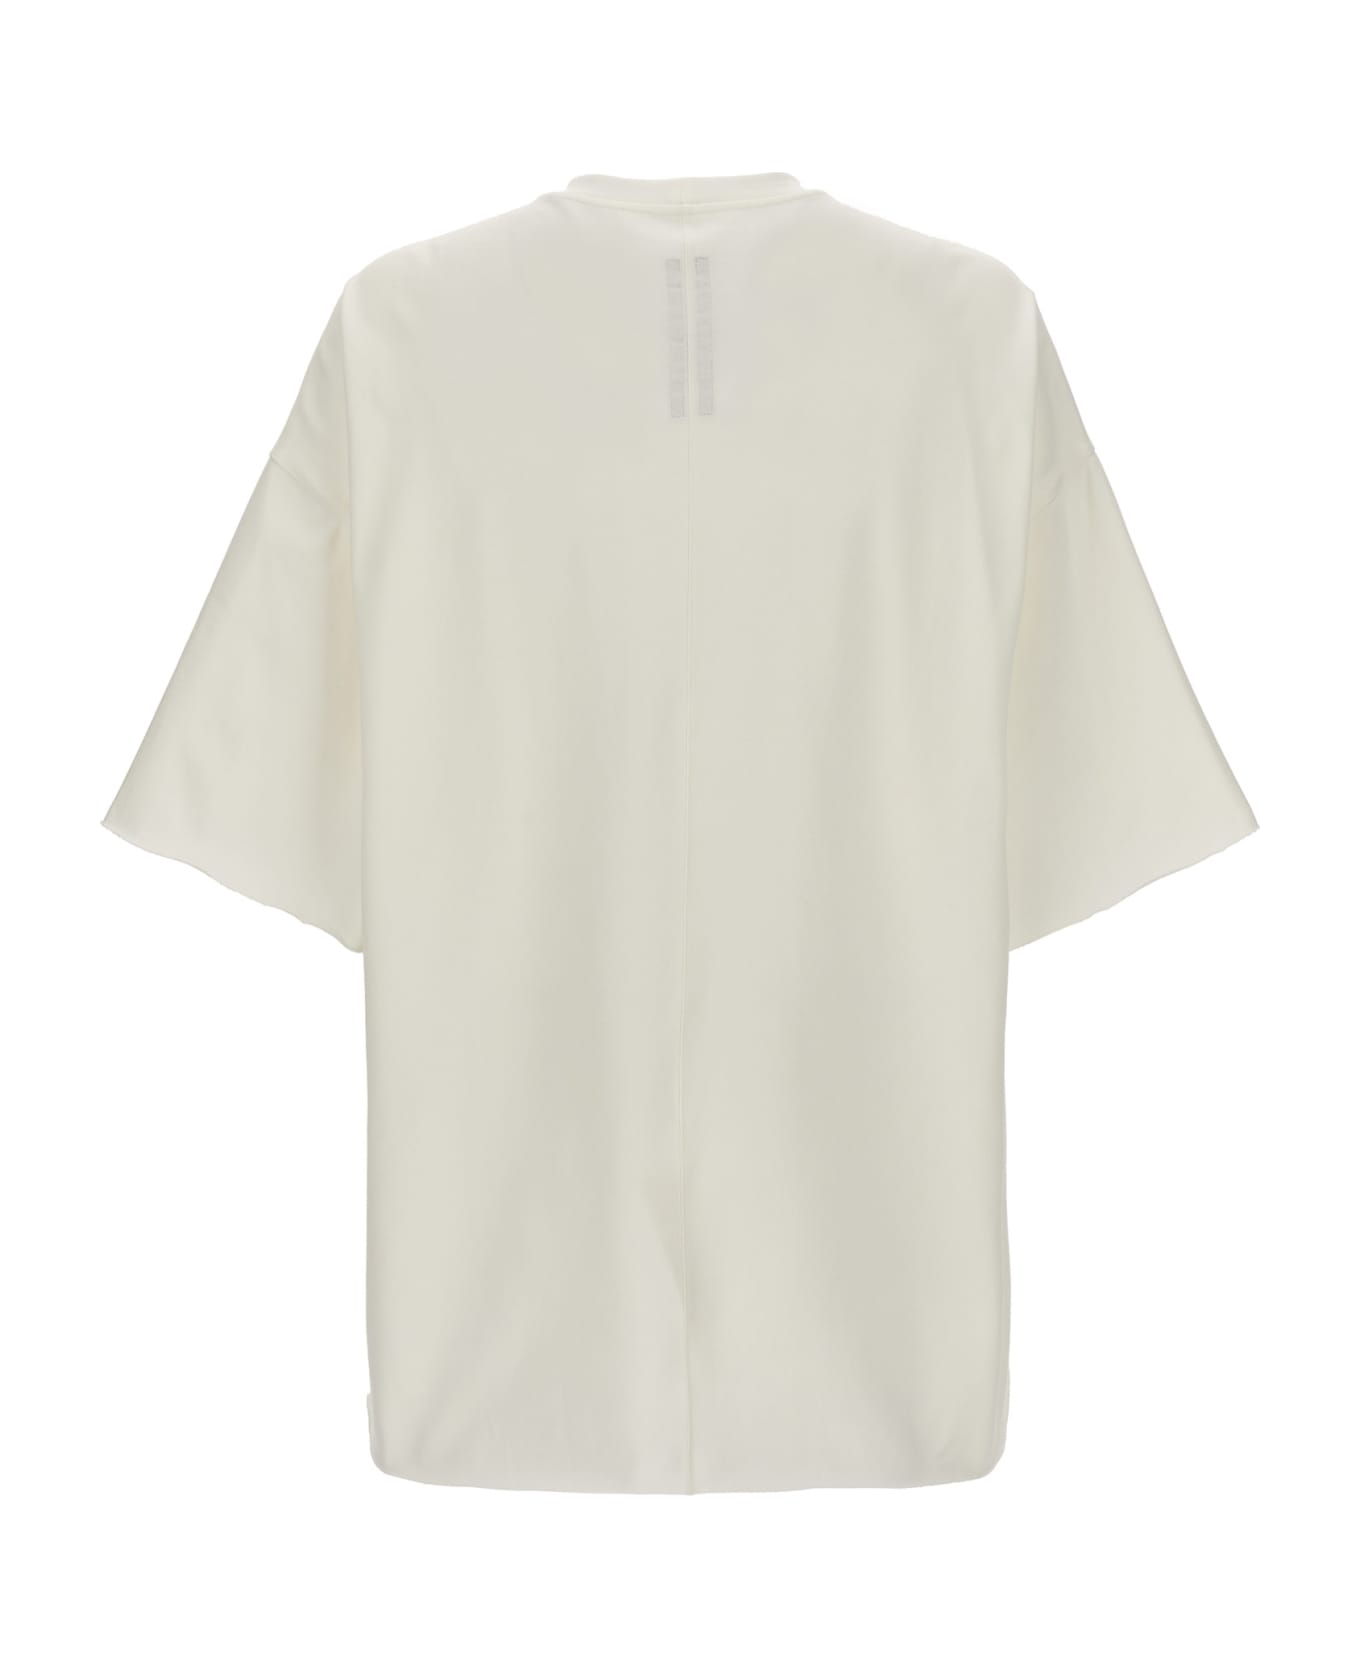 Rick Owens 'tommy T' T-shirt - White シャツ